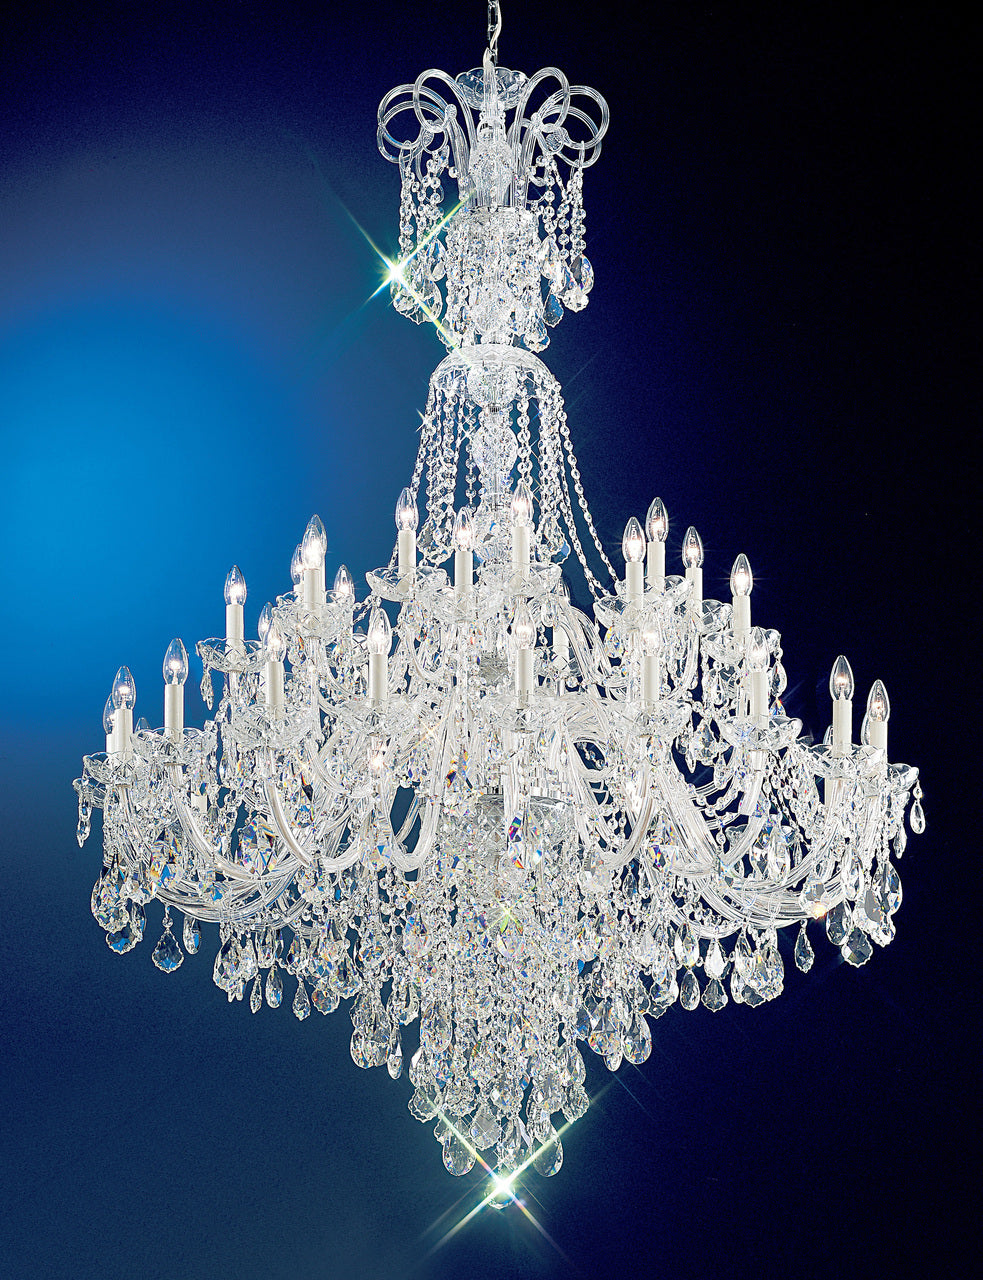 Classic Lighting 8266 CH SC Bohemia Crystal/Glass Chandelier in Chrome (Imported from Italy)